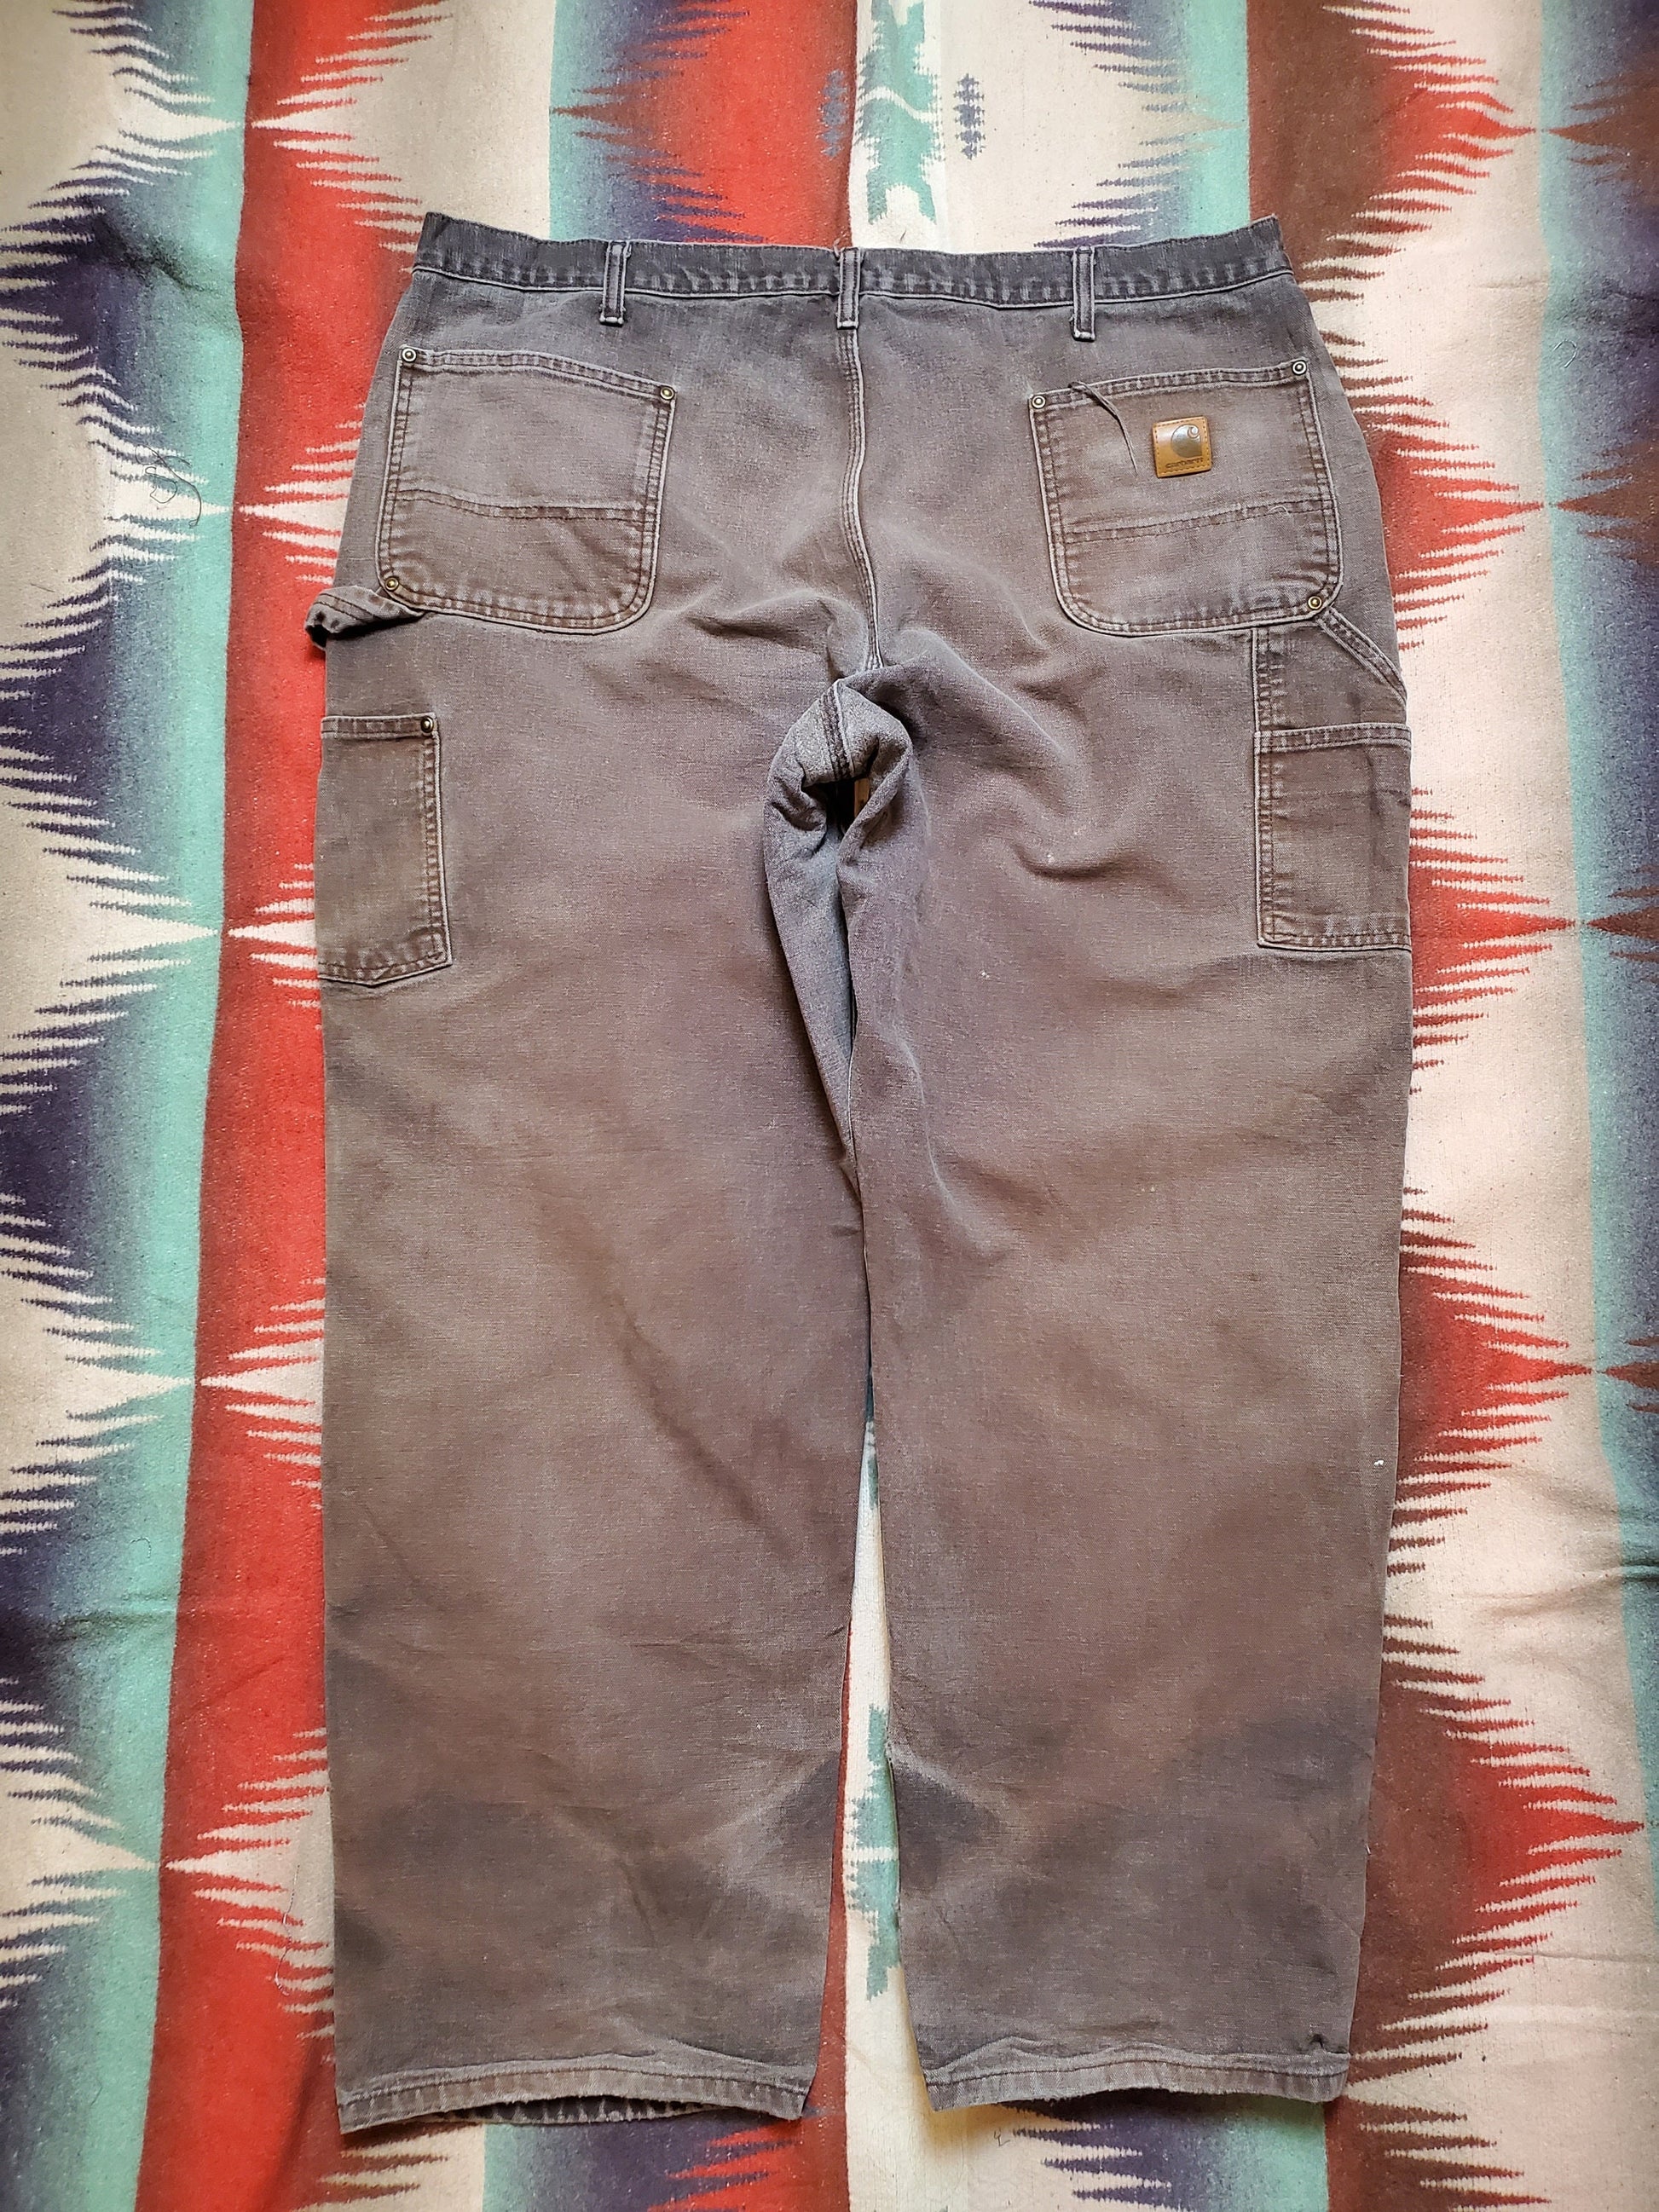 2000s Faded Brown Carhartt Double Knee Work Pants Size 41x29.5